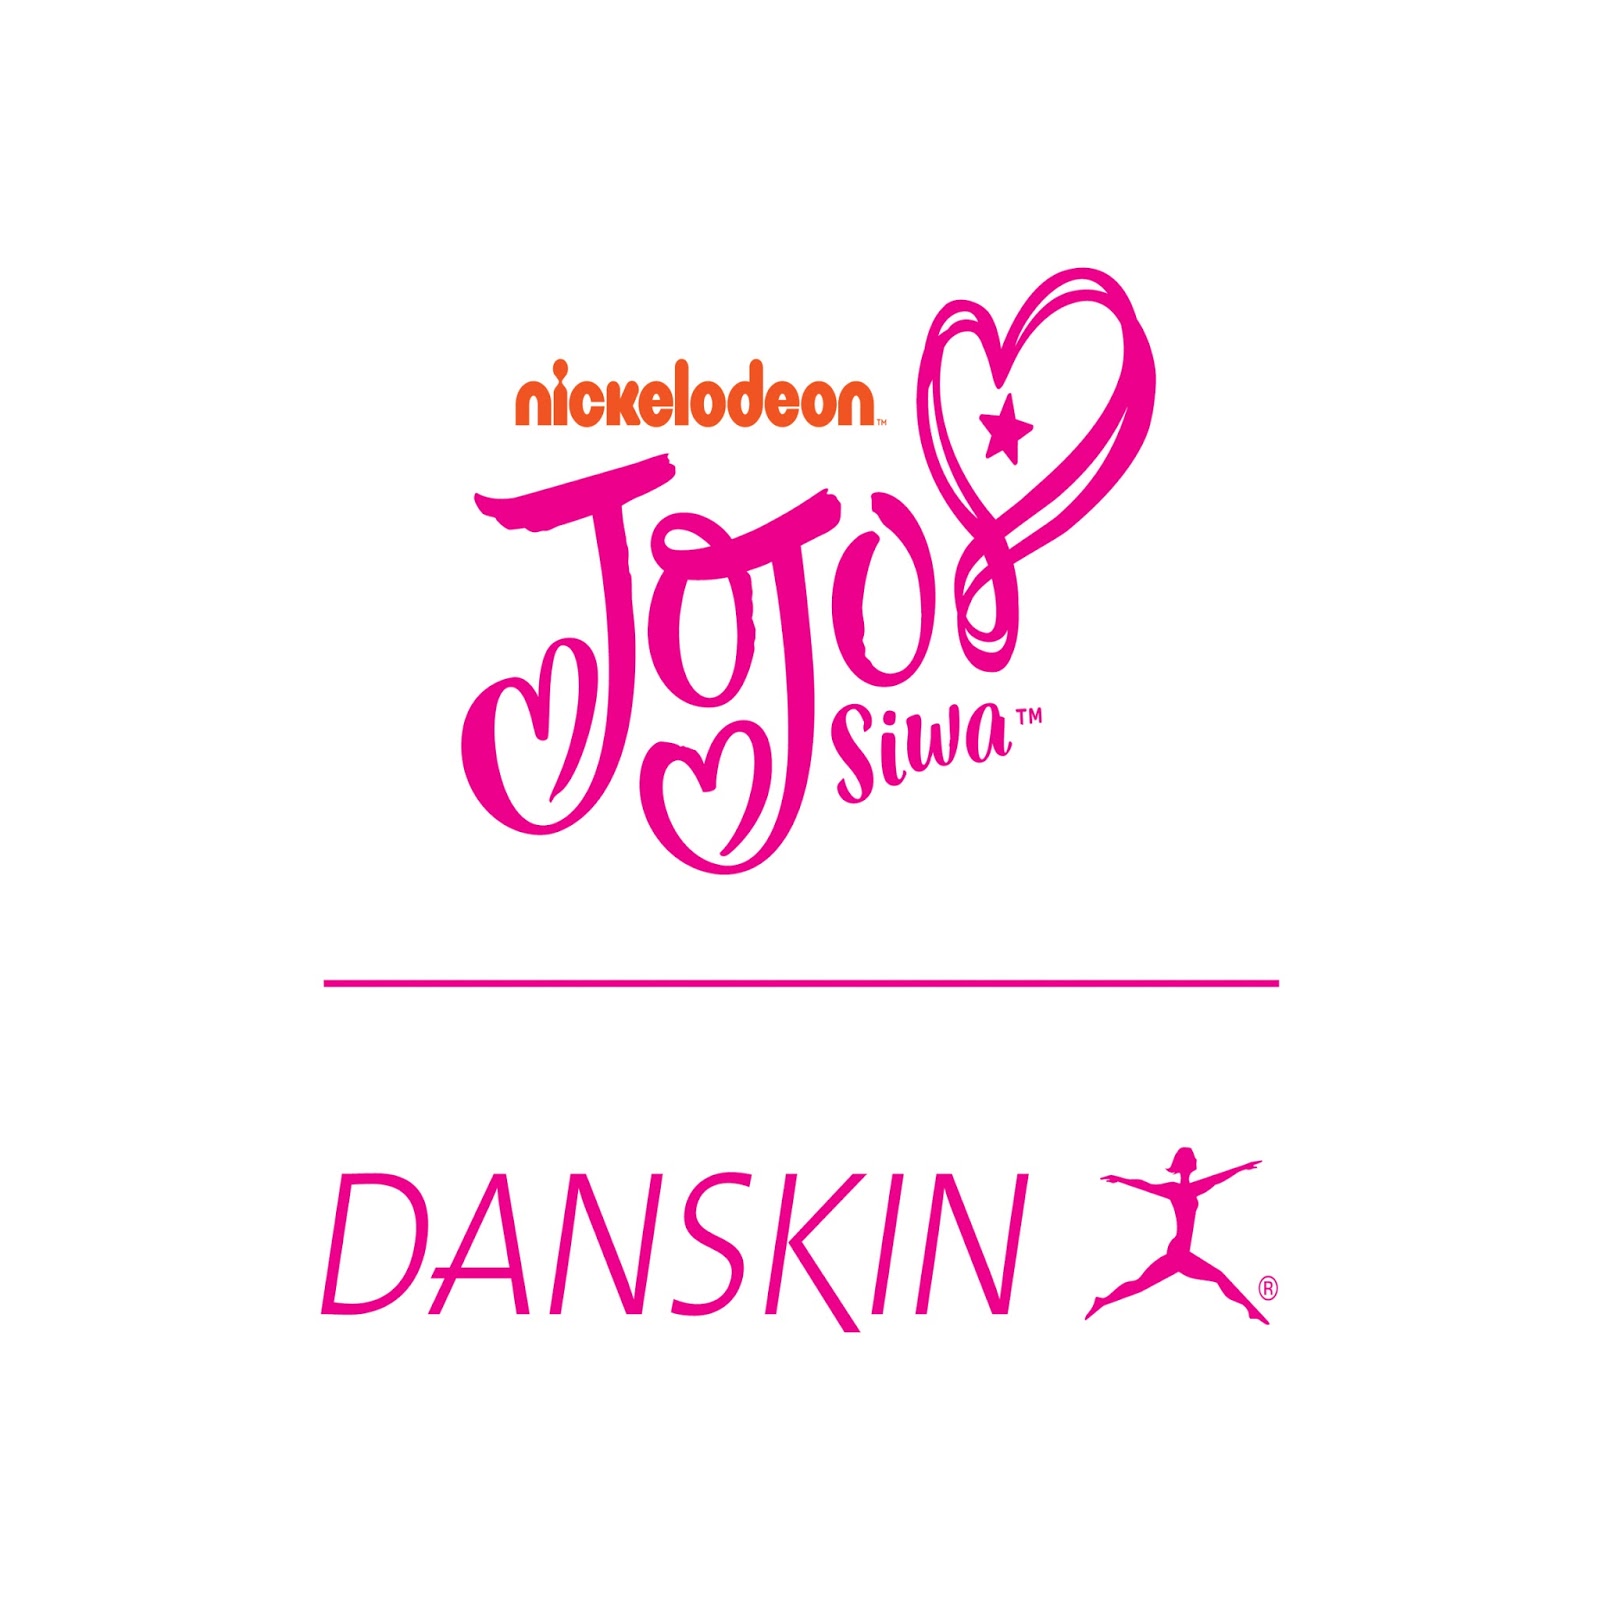 NickALive!: Nickelodeon Partners With Danskin To Launch Line Of